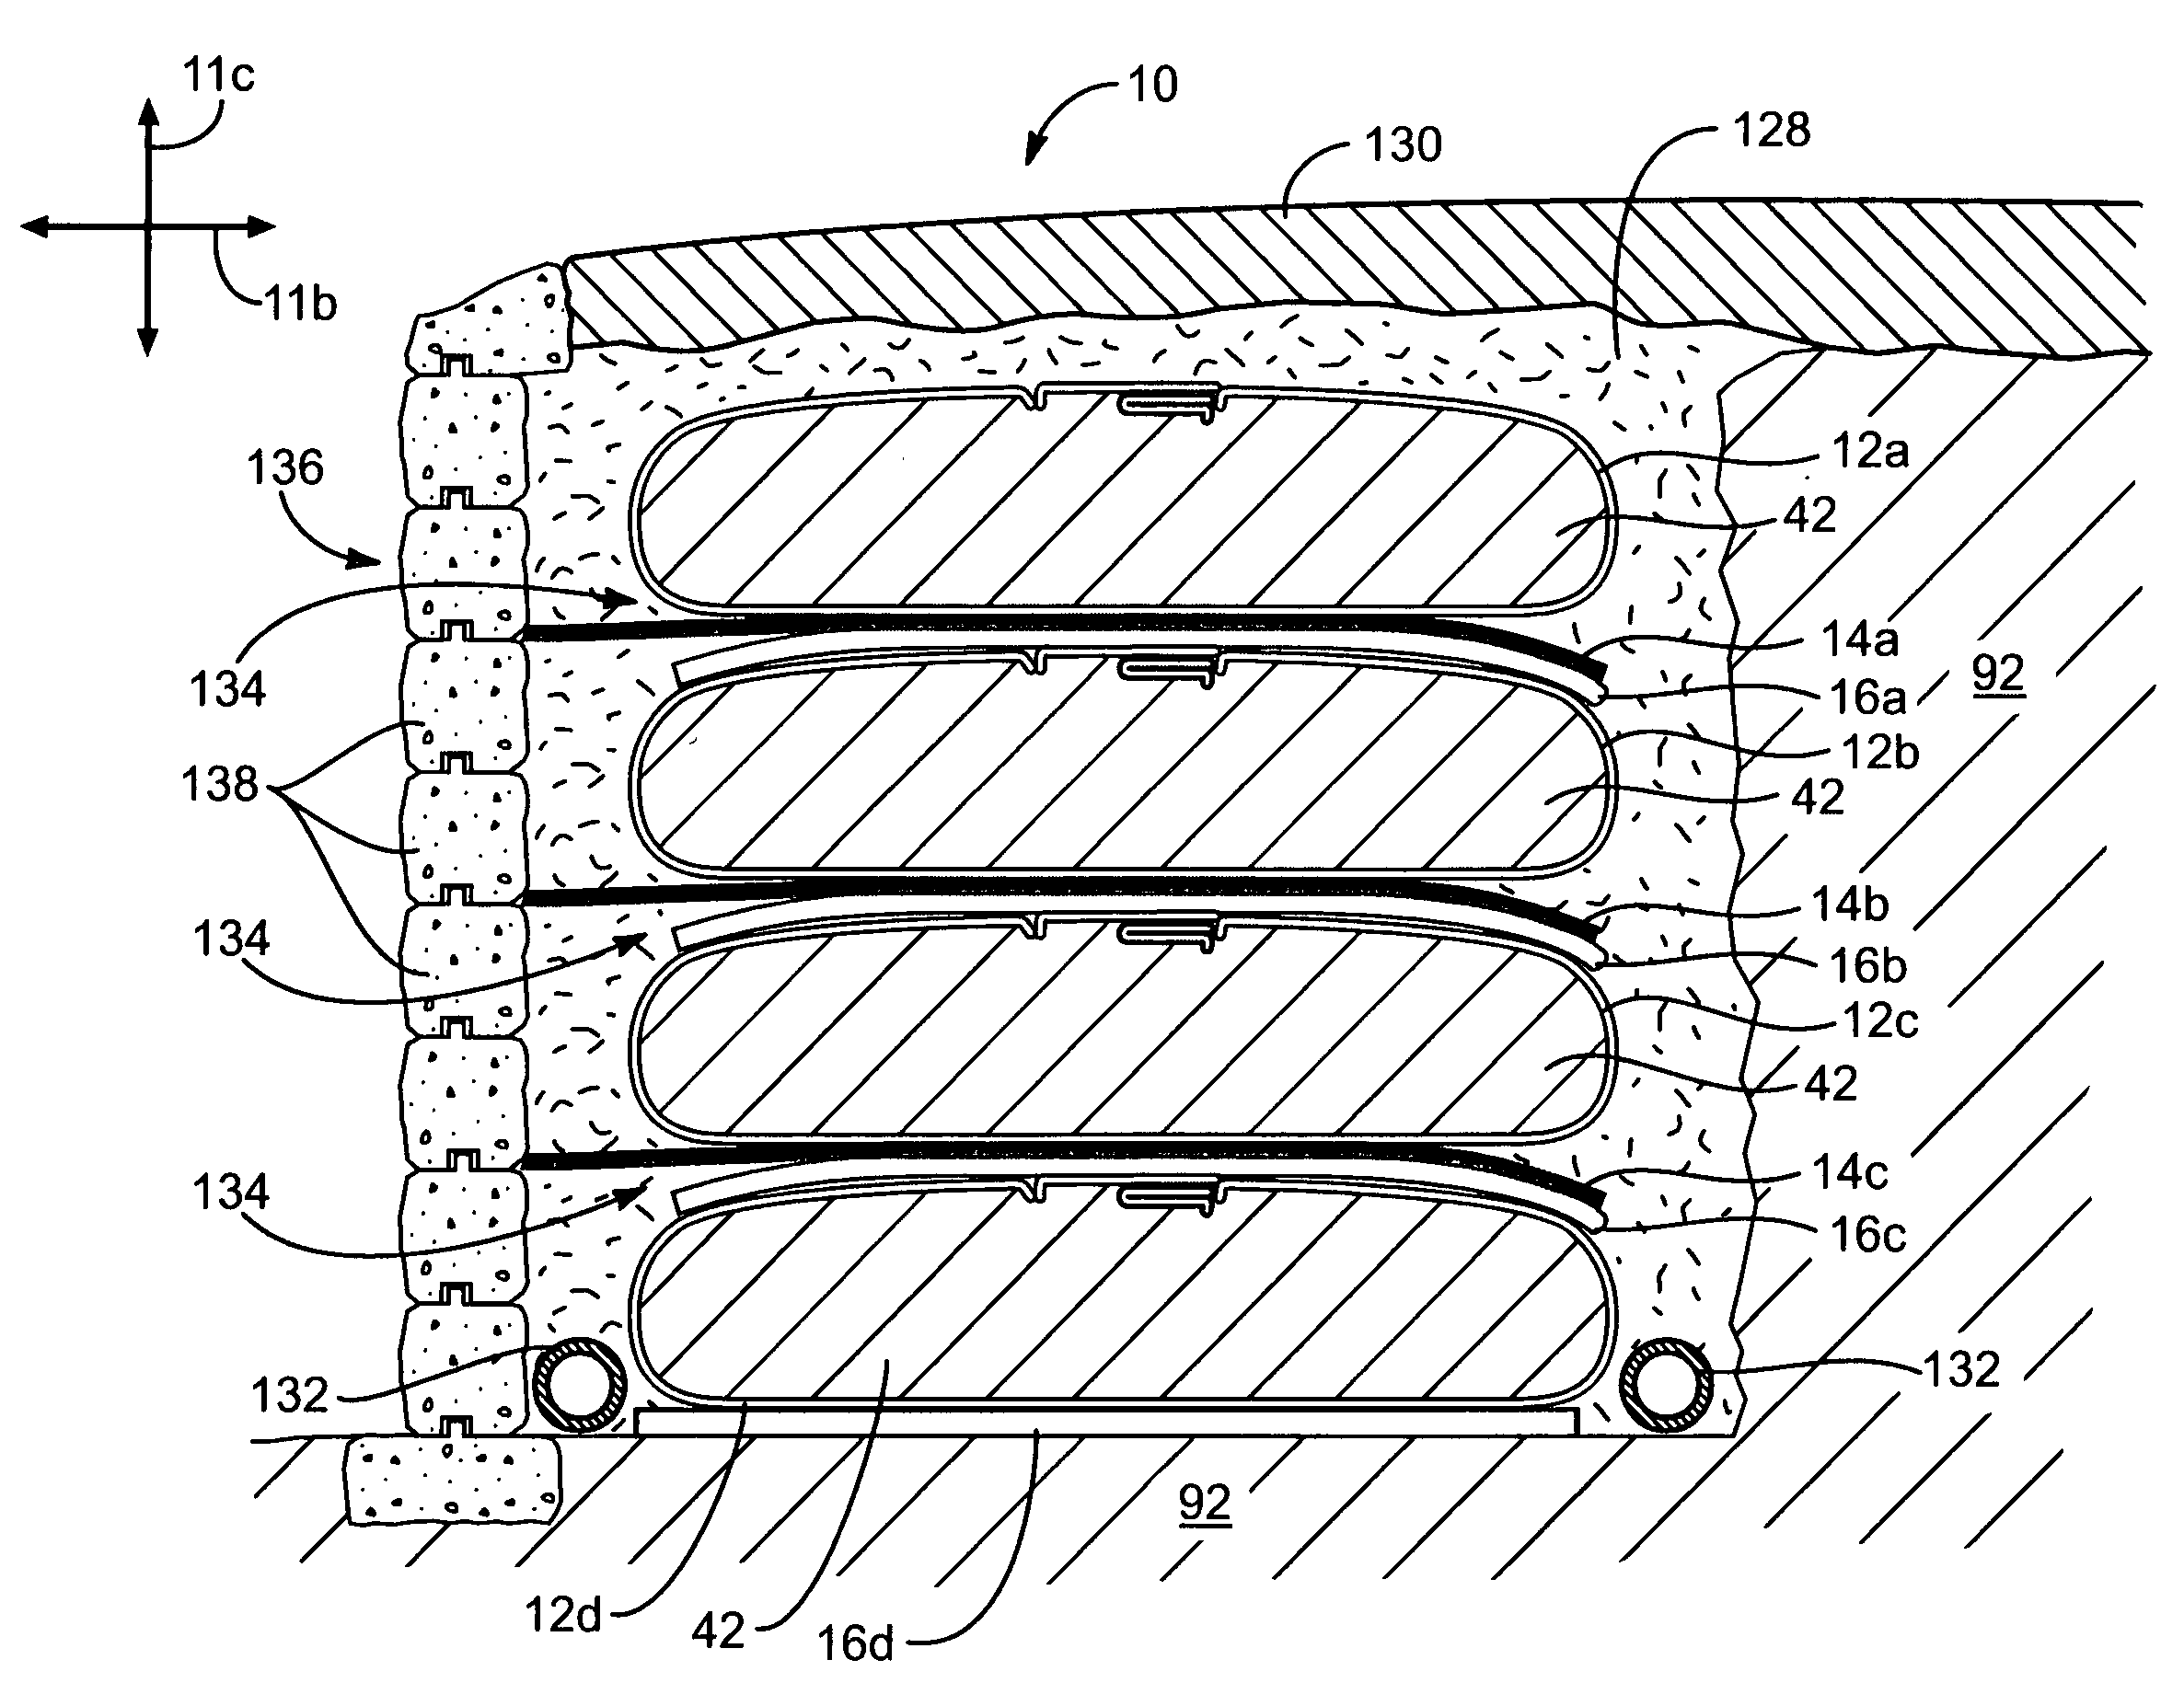 Fine-grained fill reinforcing apparatus and method